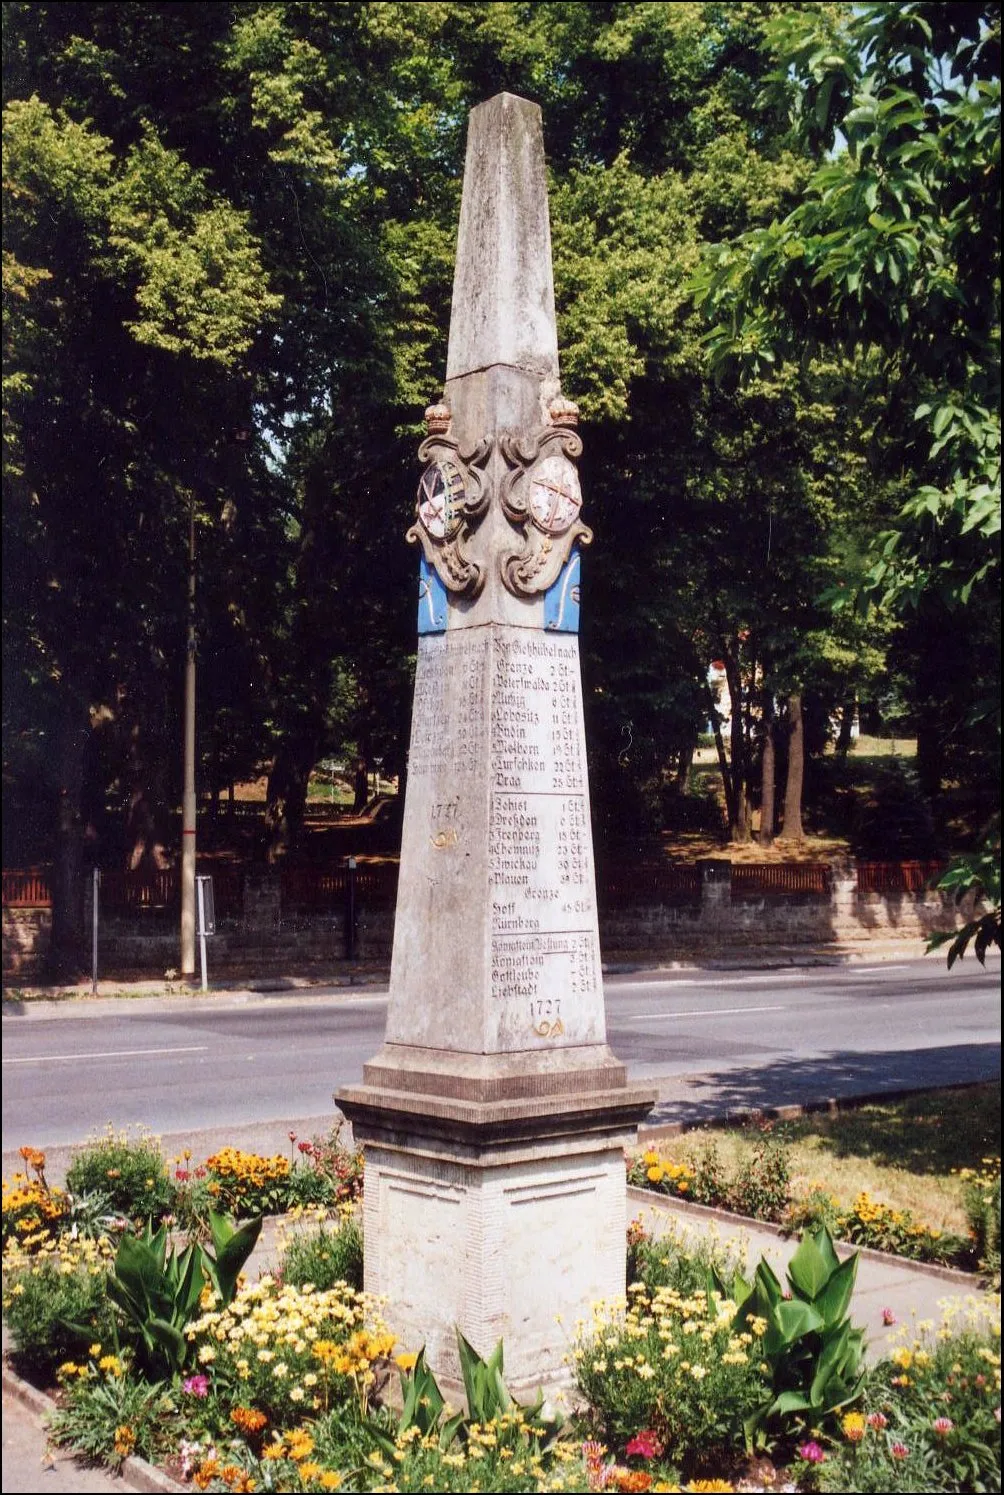 Photo showing: Berggießhübel: The electoral saxonian post mile pillar from 1727.